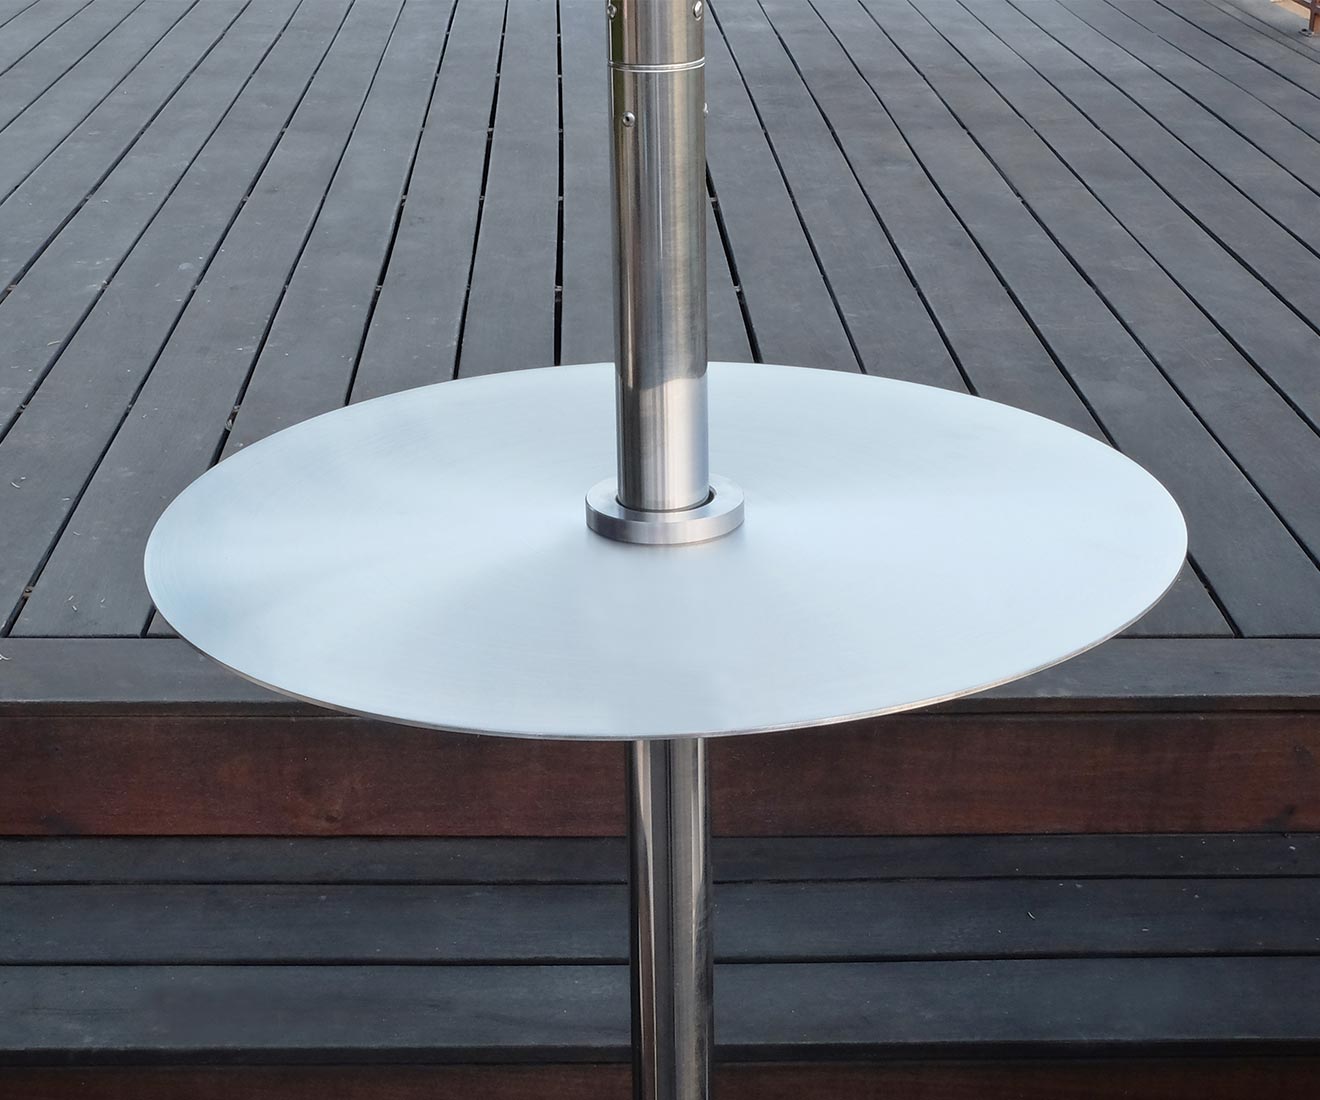 Permasteel PH-90202-SS 1500W Electric Infrared Stainless Steel Patio Heater with Side Table